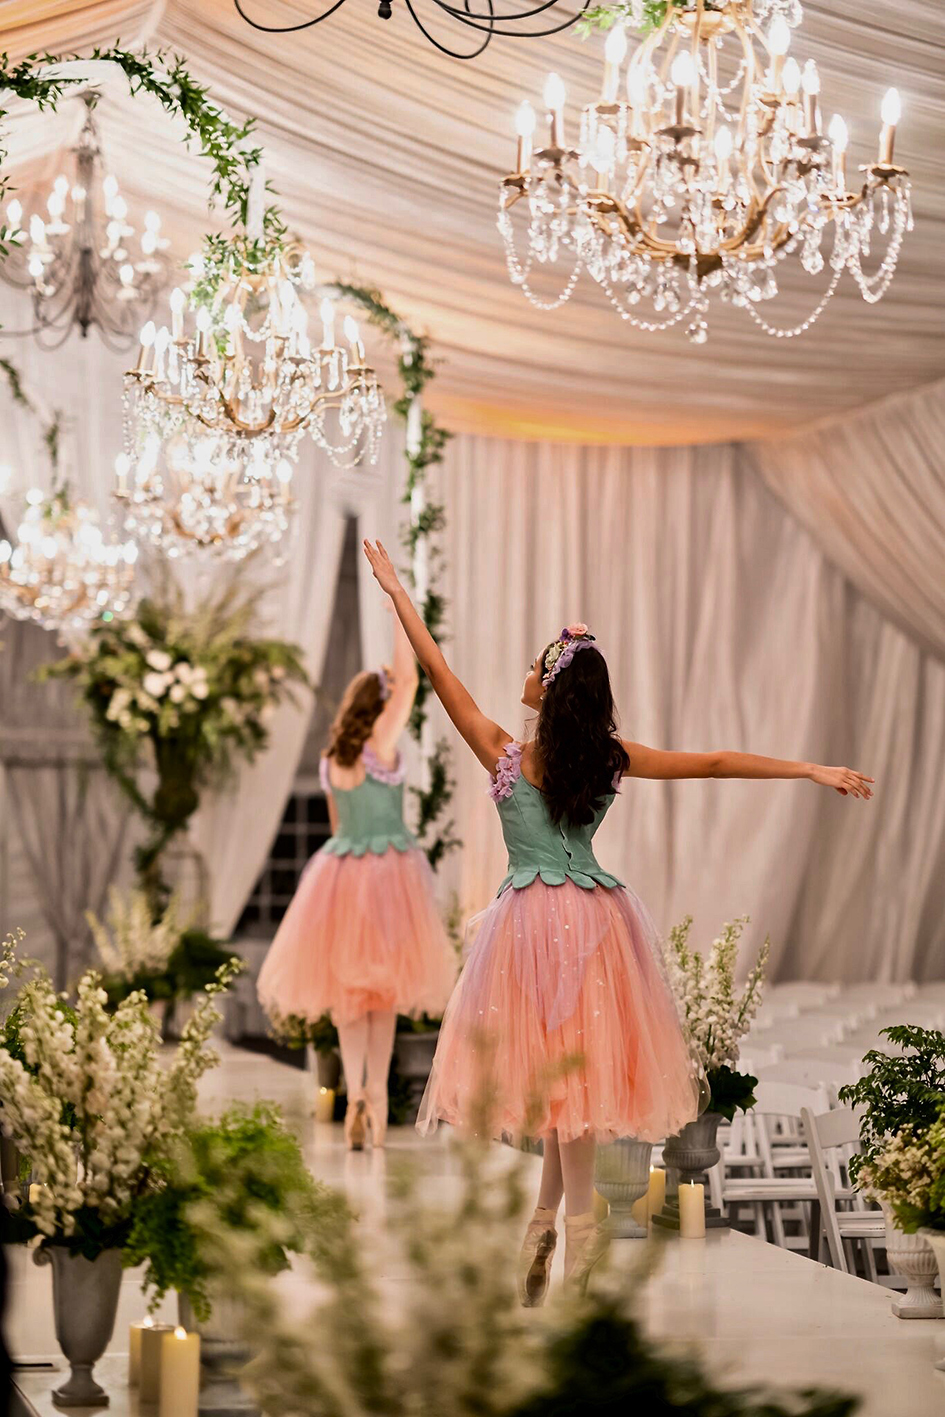 Dancers prance down the aisle at Michael and Neda's wedding at Four Seasons Westlake Village